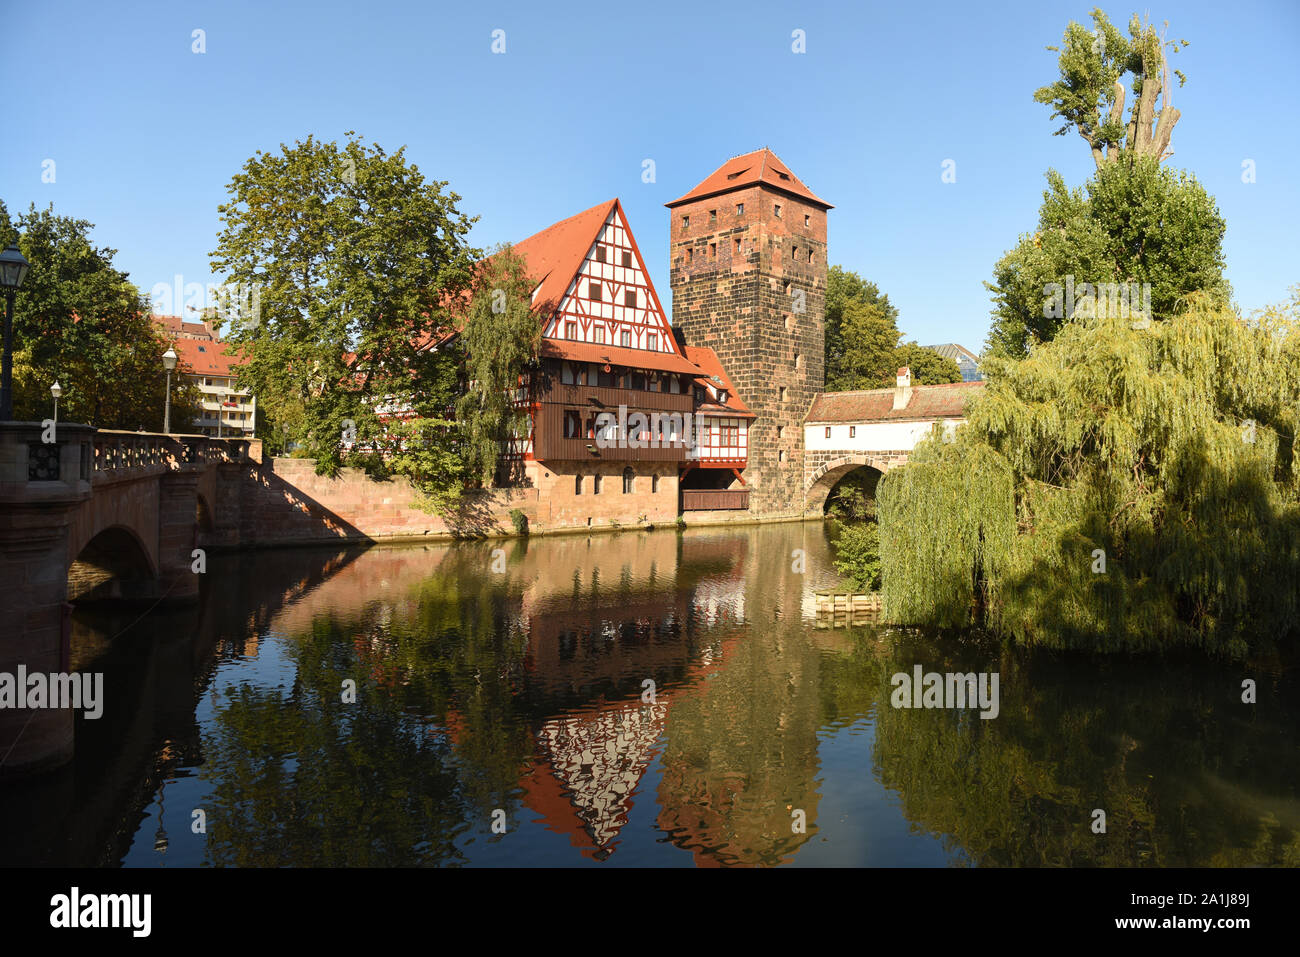 Nuremberg cityscape. View on Weinstadel and Wasserturm in old city Nuremberg, Germany. Stock Photo